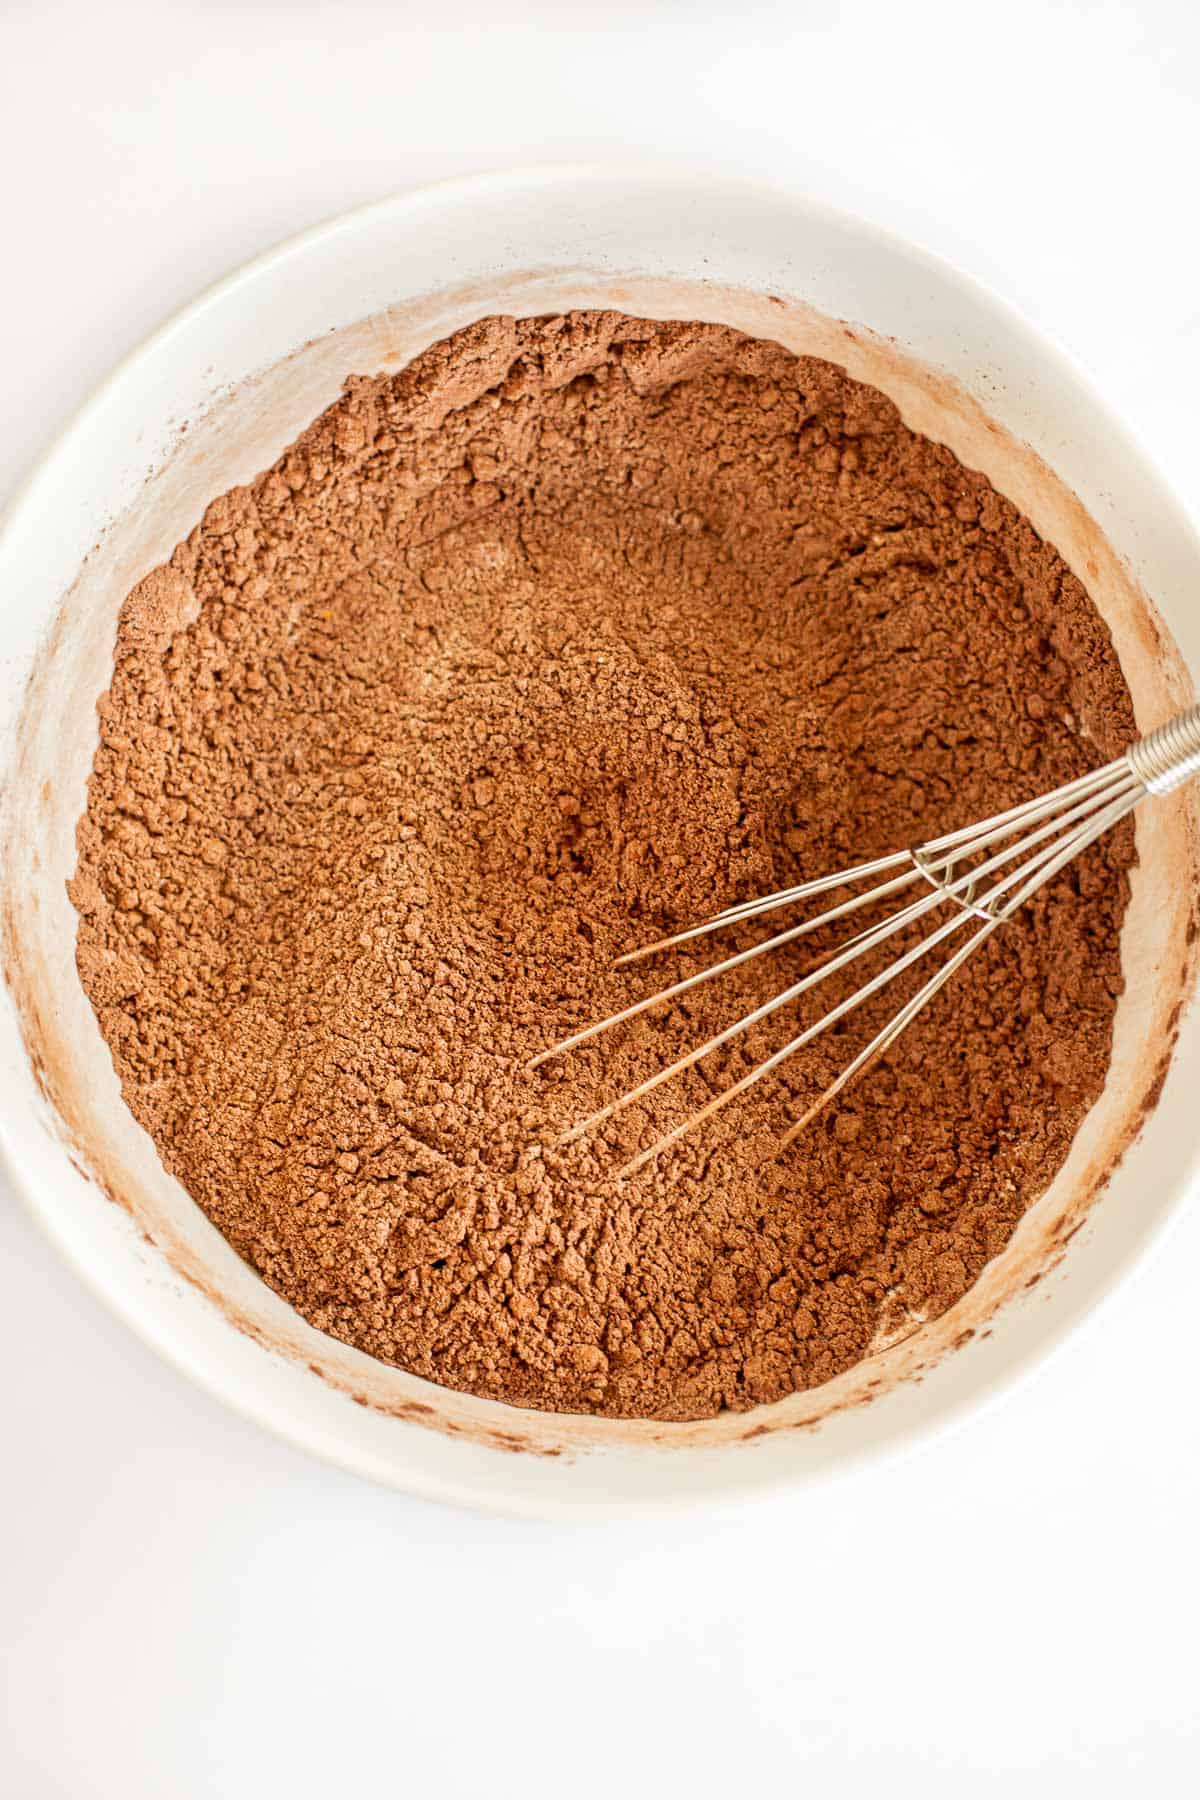 flour, cocoa powder, and sugar whisked together in a white bowl.